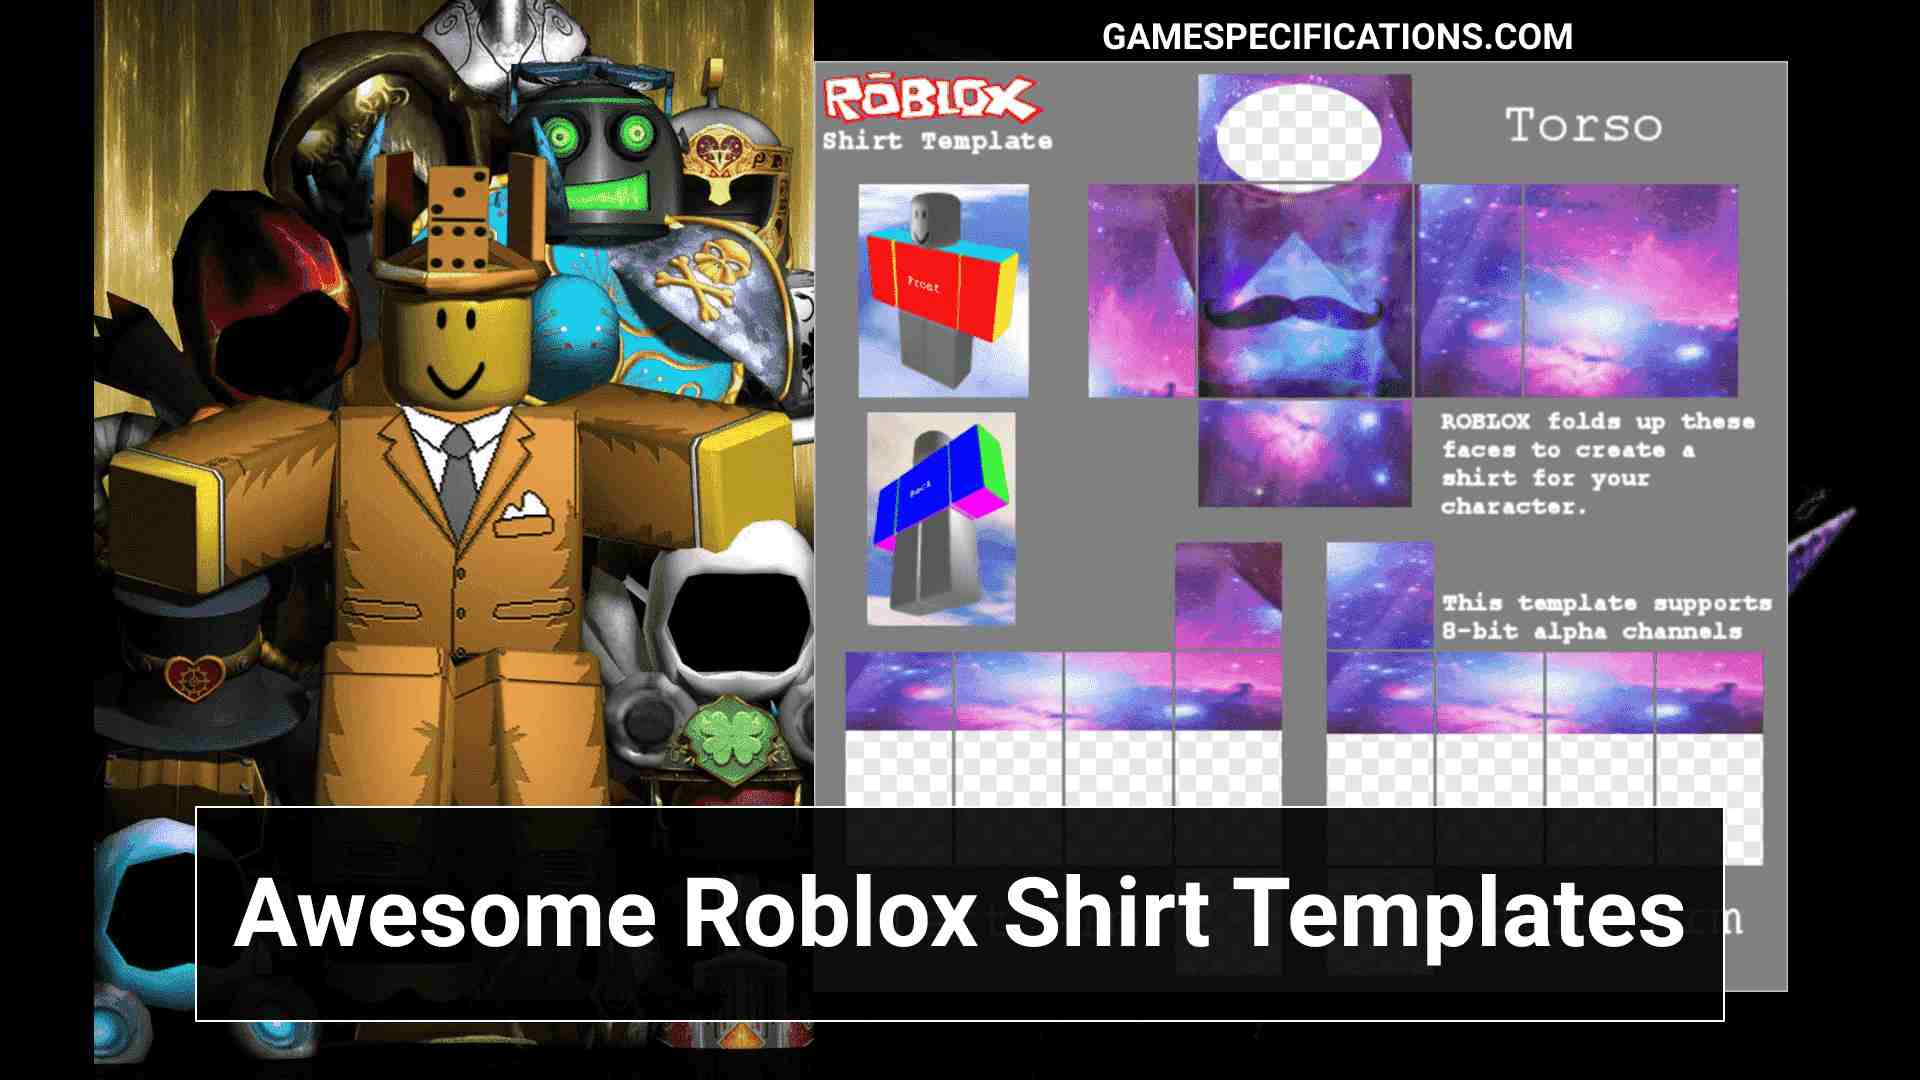 25 Coolest Roblox Shirt Templates Proved To Be The Best Game Specifications - roblox shirt wrinkle template